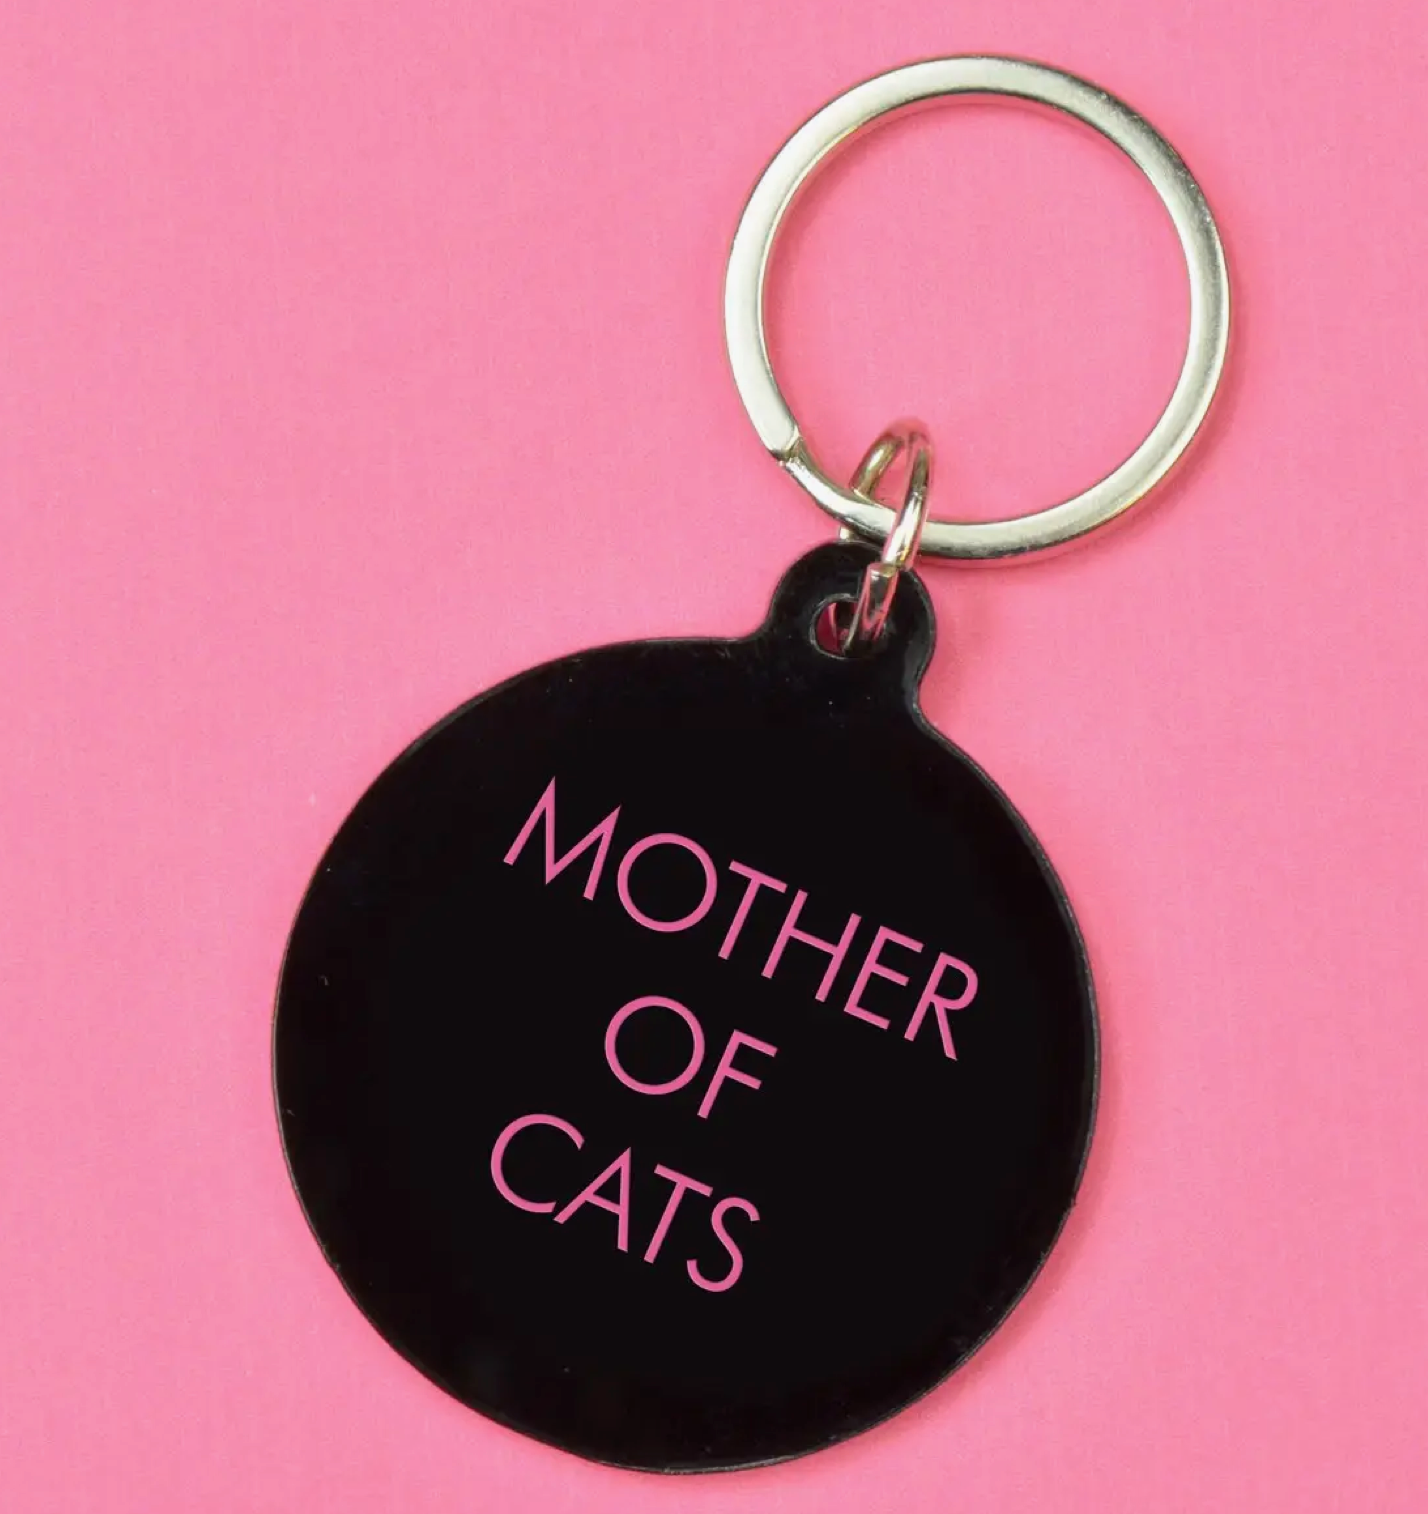 Mother of Cats Keytag